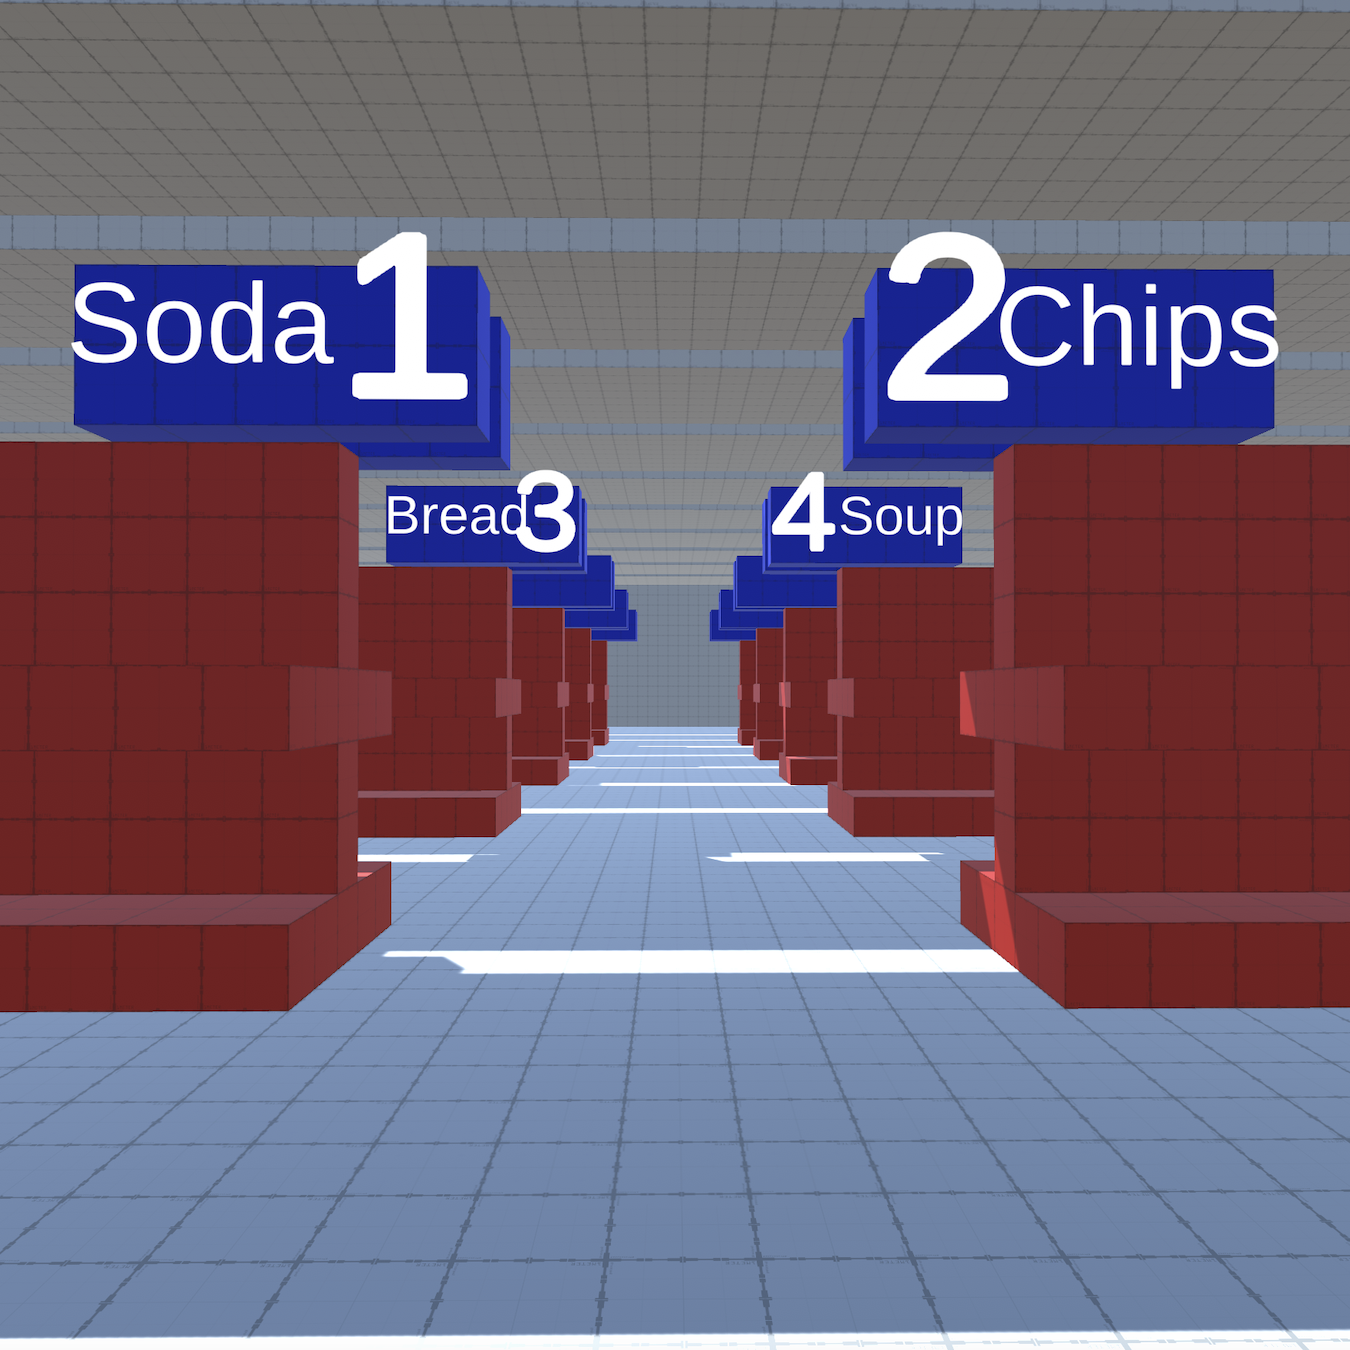 The same 3D mockup of a grocery store made in the Unity engine, but without the “Blindness Simulator” post-processing layer we are able to see it clearly. It's aisles are a bright red, the aisle end-signs are a bright blue, and the typography on the signage is big and rather ugly—but easily legible.